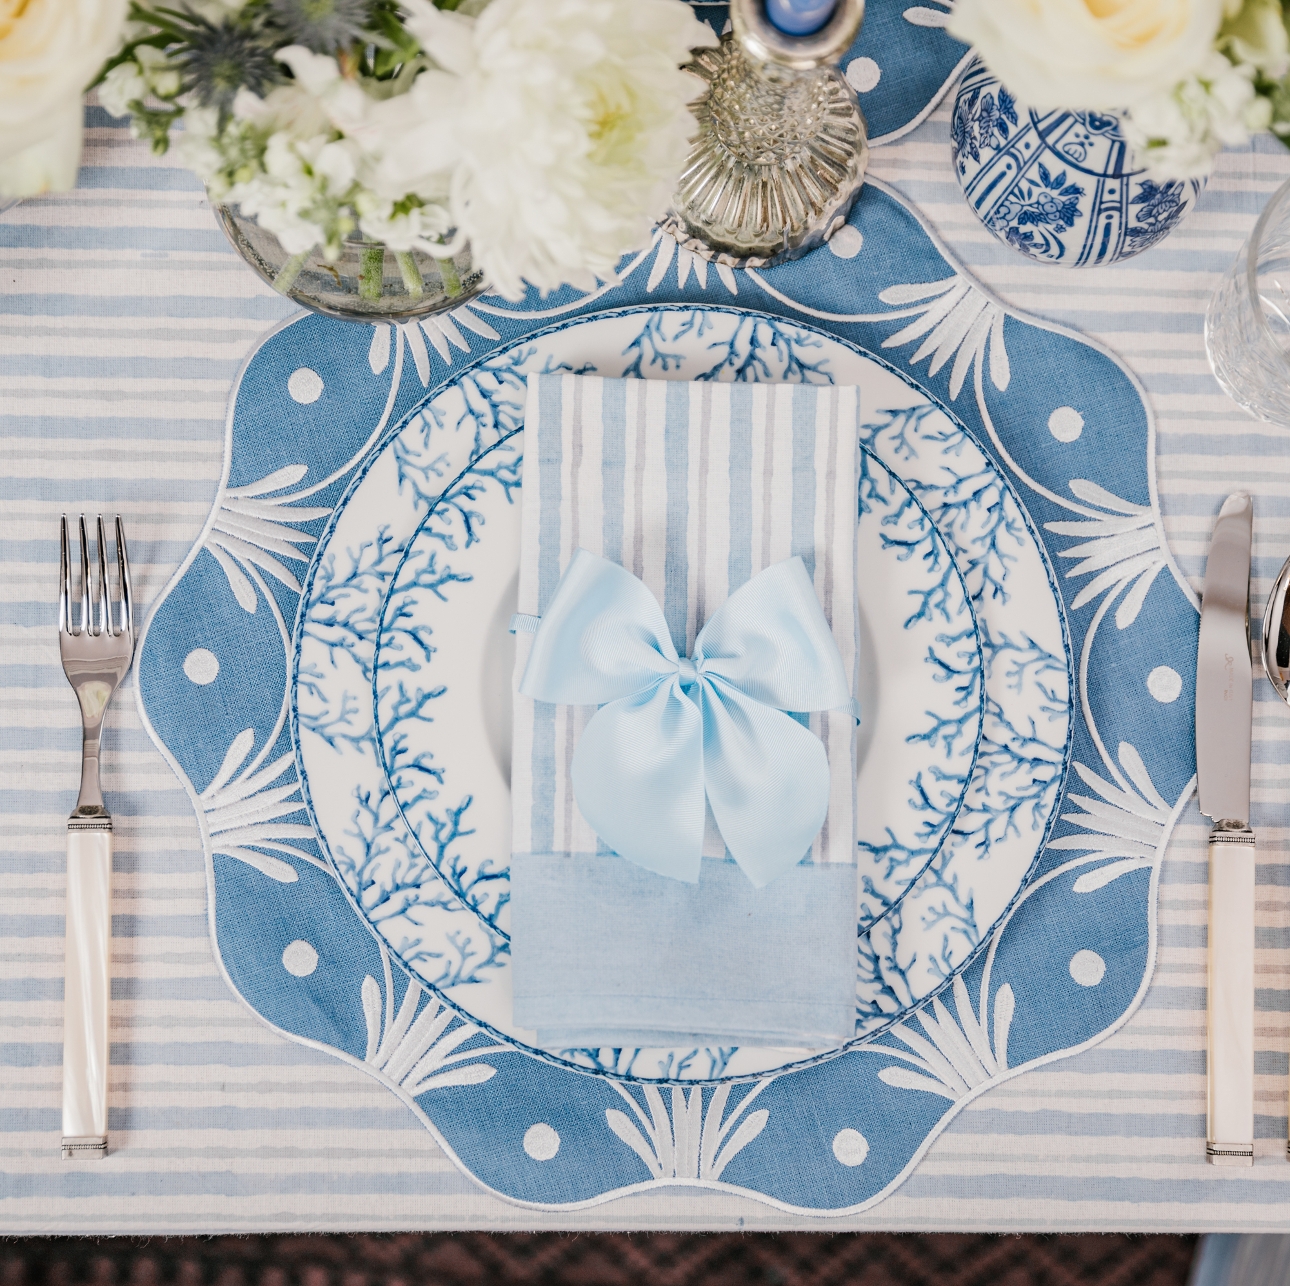 table place setting in blue and white